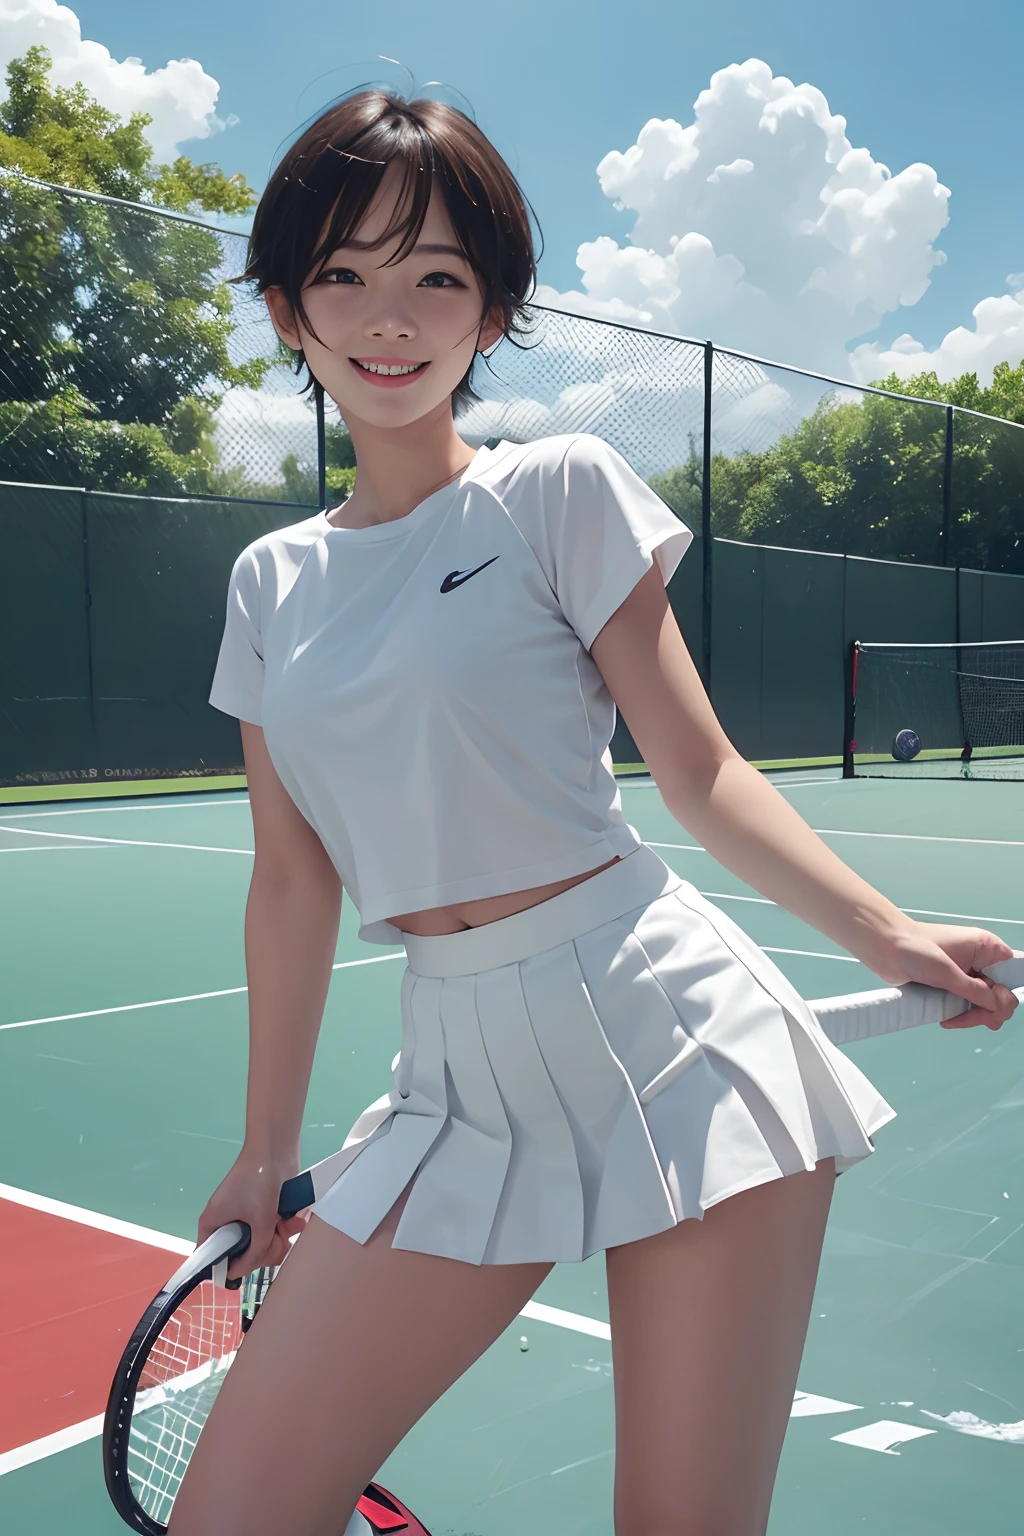 Pubic hair grows、Smile full of happiness、((nearly naked:1.3))、nearly naked、、Panting face、Lacking、After being attacked、Sweating、Expression in a state of excitement、short-hair、eye glass、1girll，Tennis player，face perfect，crisp breasts, Convex buttocks,White Sport Short Sleeve，Short white pleated skirt，White sport socks，White Tennis Shoes，Wet hair，short-hair、a wet body，Shake the paddle，Tennis Court，Sunnyday，Clouds， Detailed background, Clothing Details, Perfectly proportioned, film grains, Fuji colors, lightand shade contrast, tmasterpiece, high detal, high quarity, hight resolution, Cinematic lighting, 8K, Textured skin, Super Detail